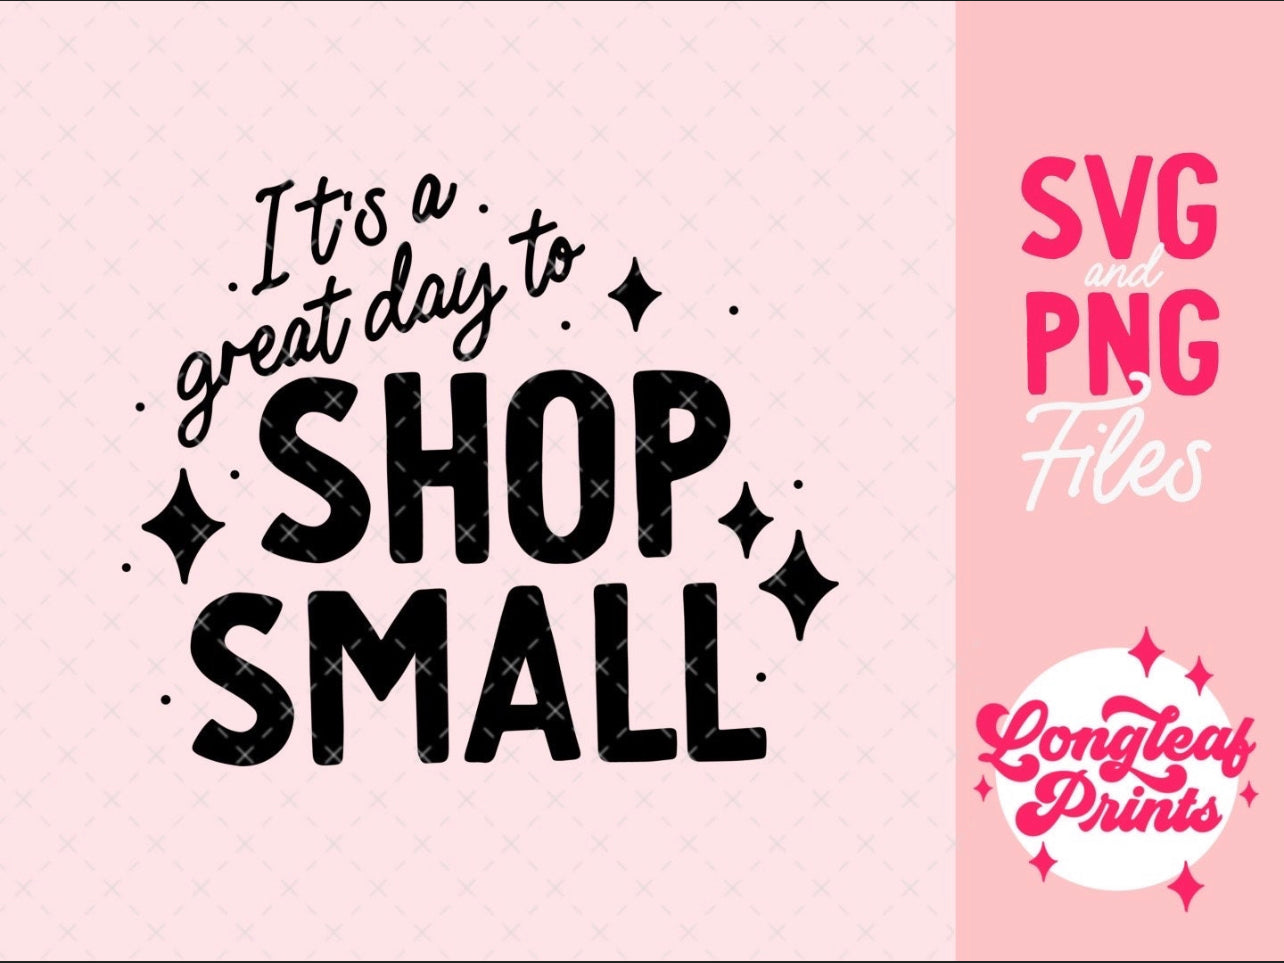 It's a Great Day to Shop Small SVG Digital Download Design File